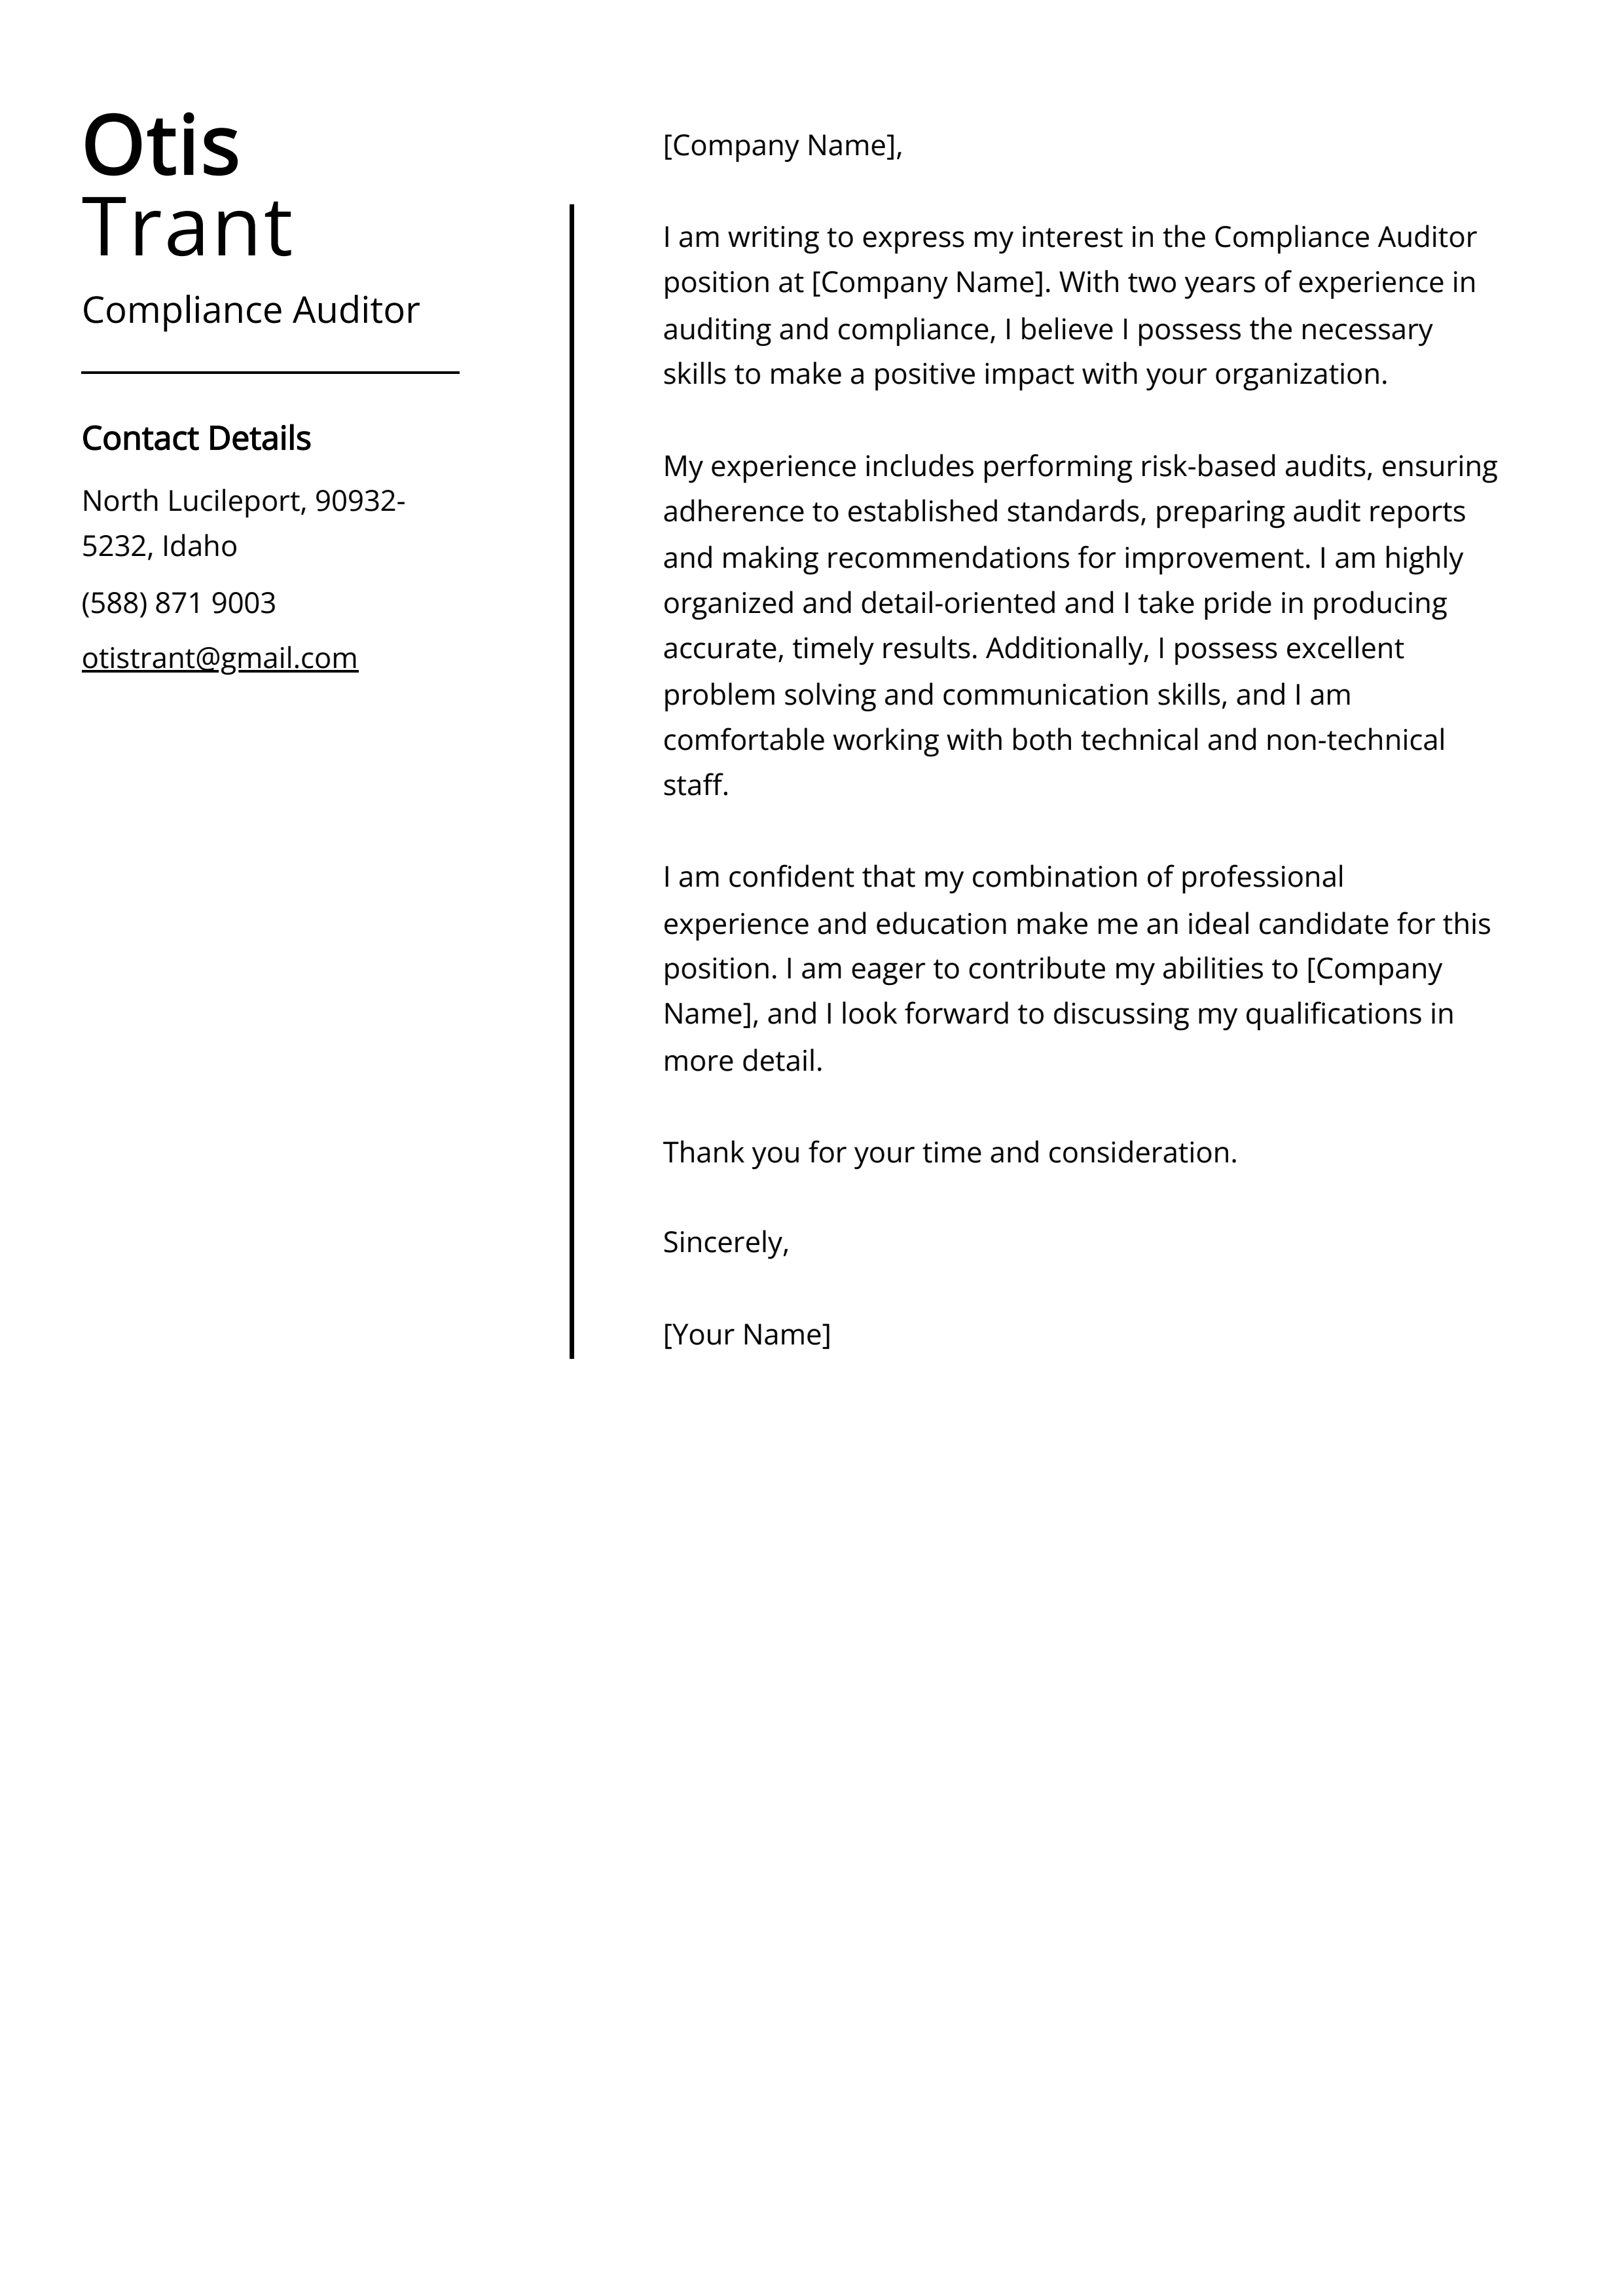 Compliance Auditor Cover Letter Example